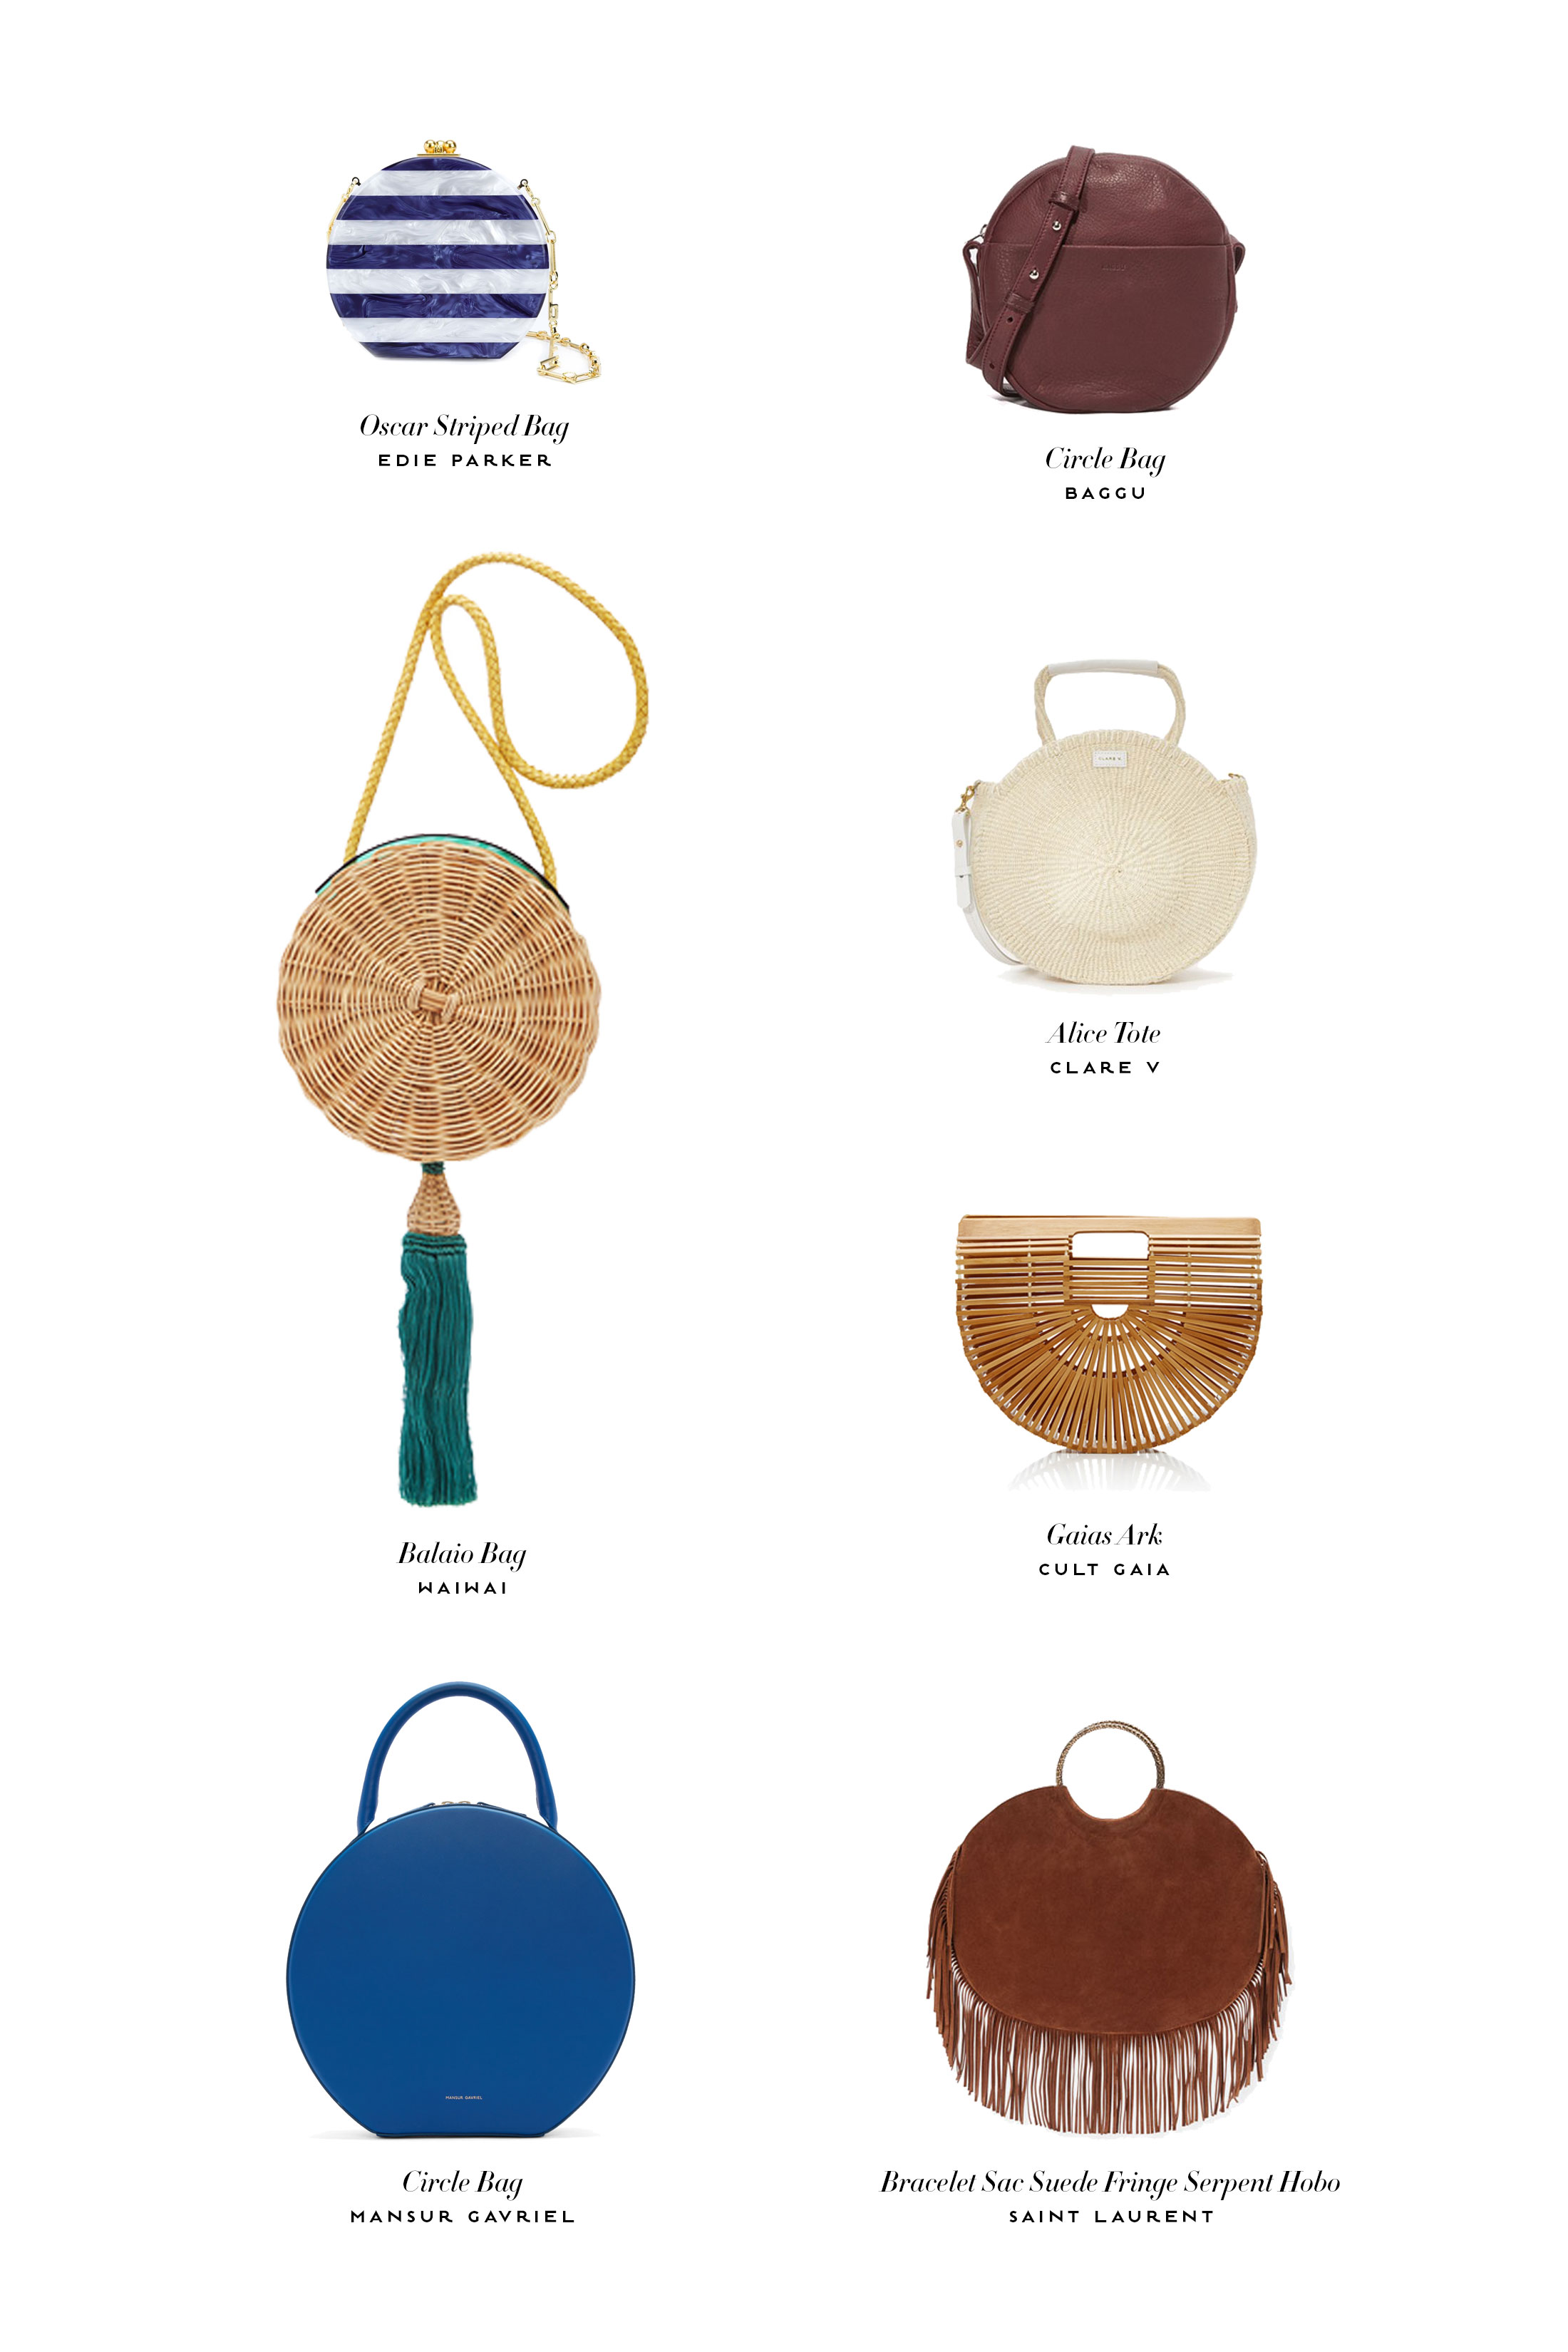 Mansur Gavriel, Clare V, Cult Gaia Circle bag trend summer 2016 shopping links by A Constellation